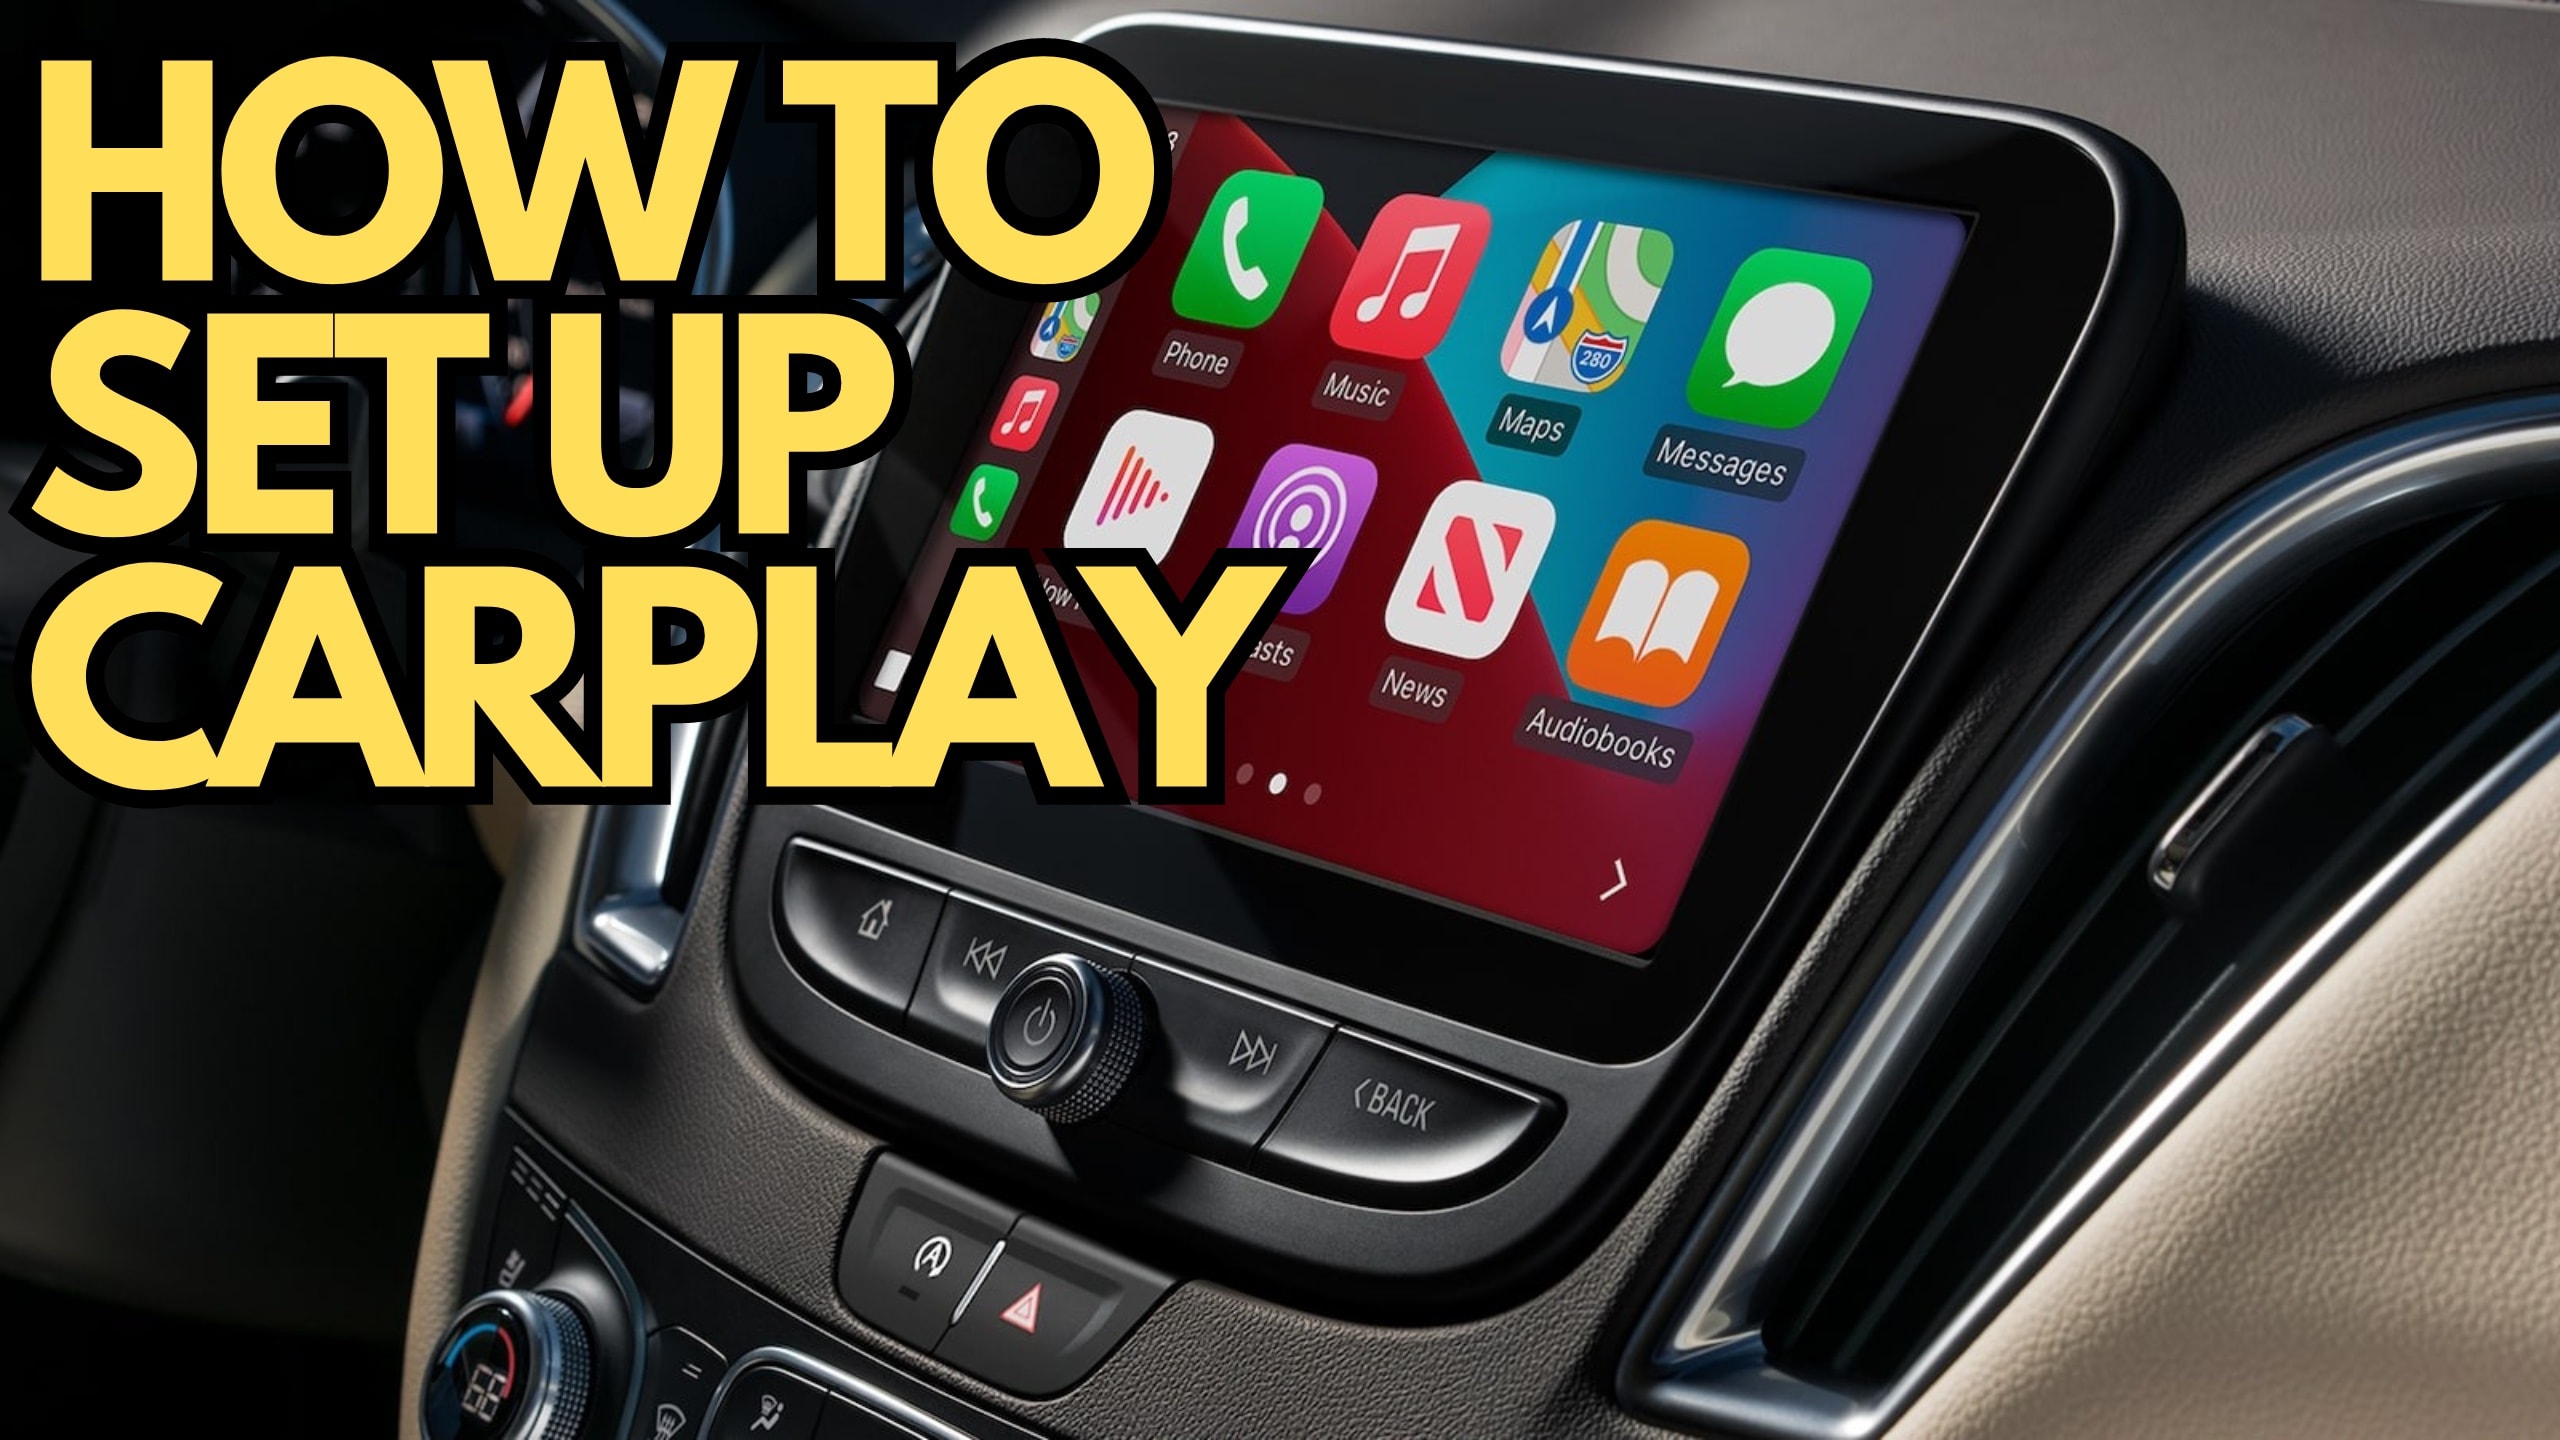 Finally figured out how to get Wireless Carplay to work on my